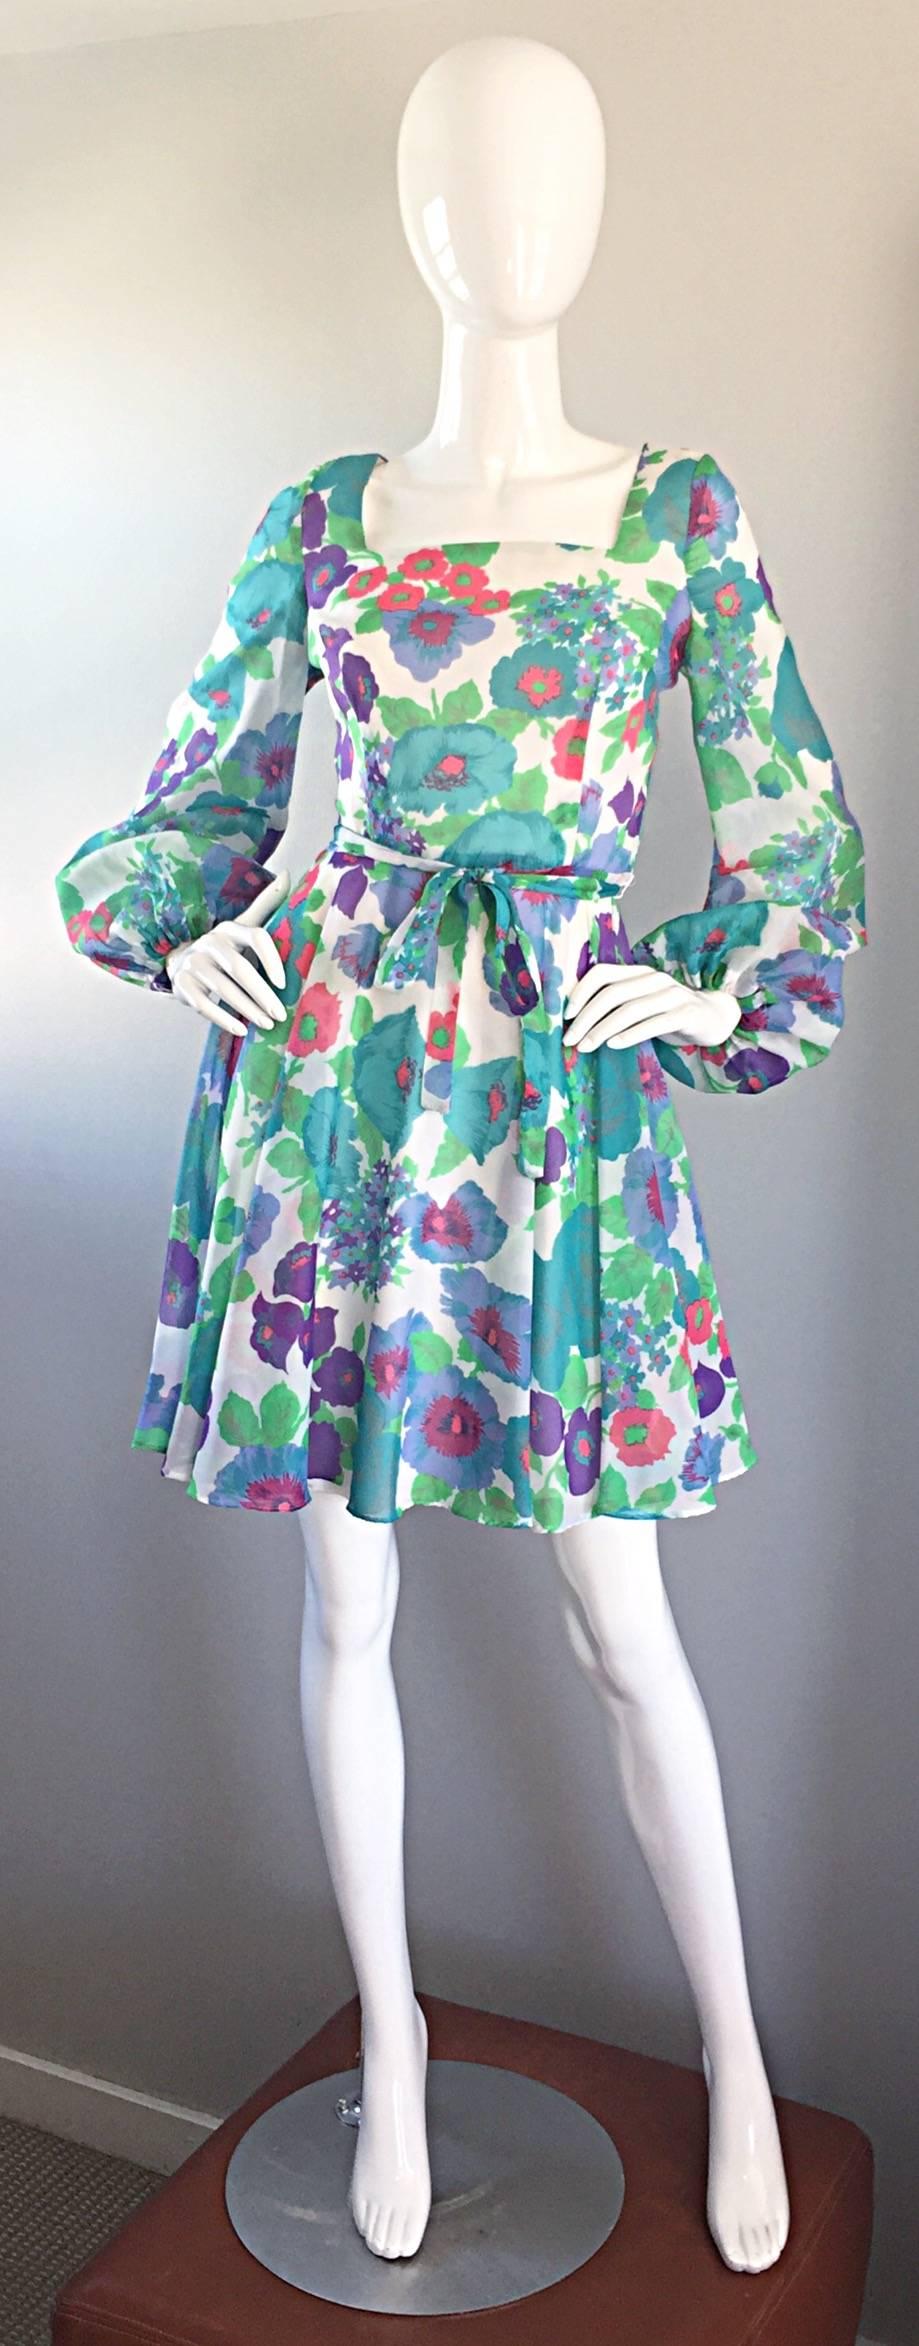 Adorable 60s babydoll dress! Features an allover floral print in blue, green, pink, purple and white! Detachable tie belt at waist. Wonderful full poet sleeves with elastic at wrists. Flattering full skirt with a fitted bodice. Full metal zipper up